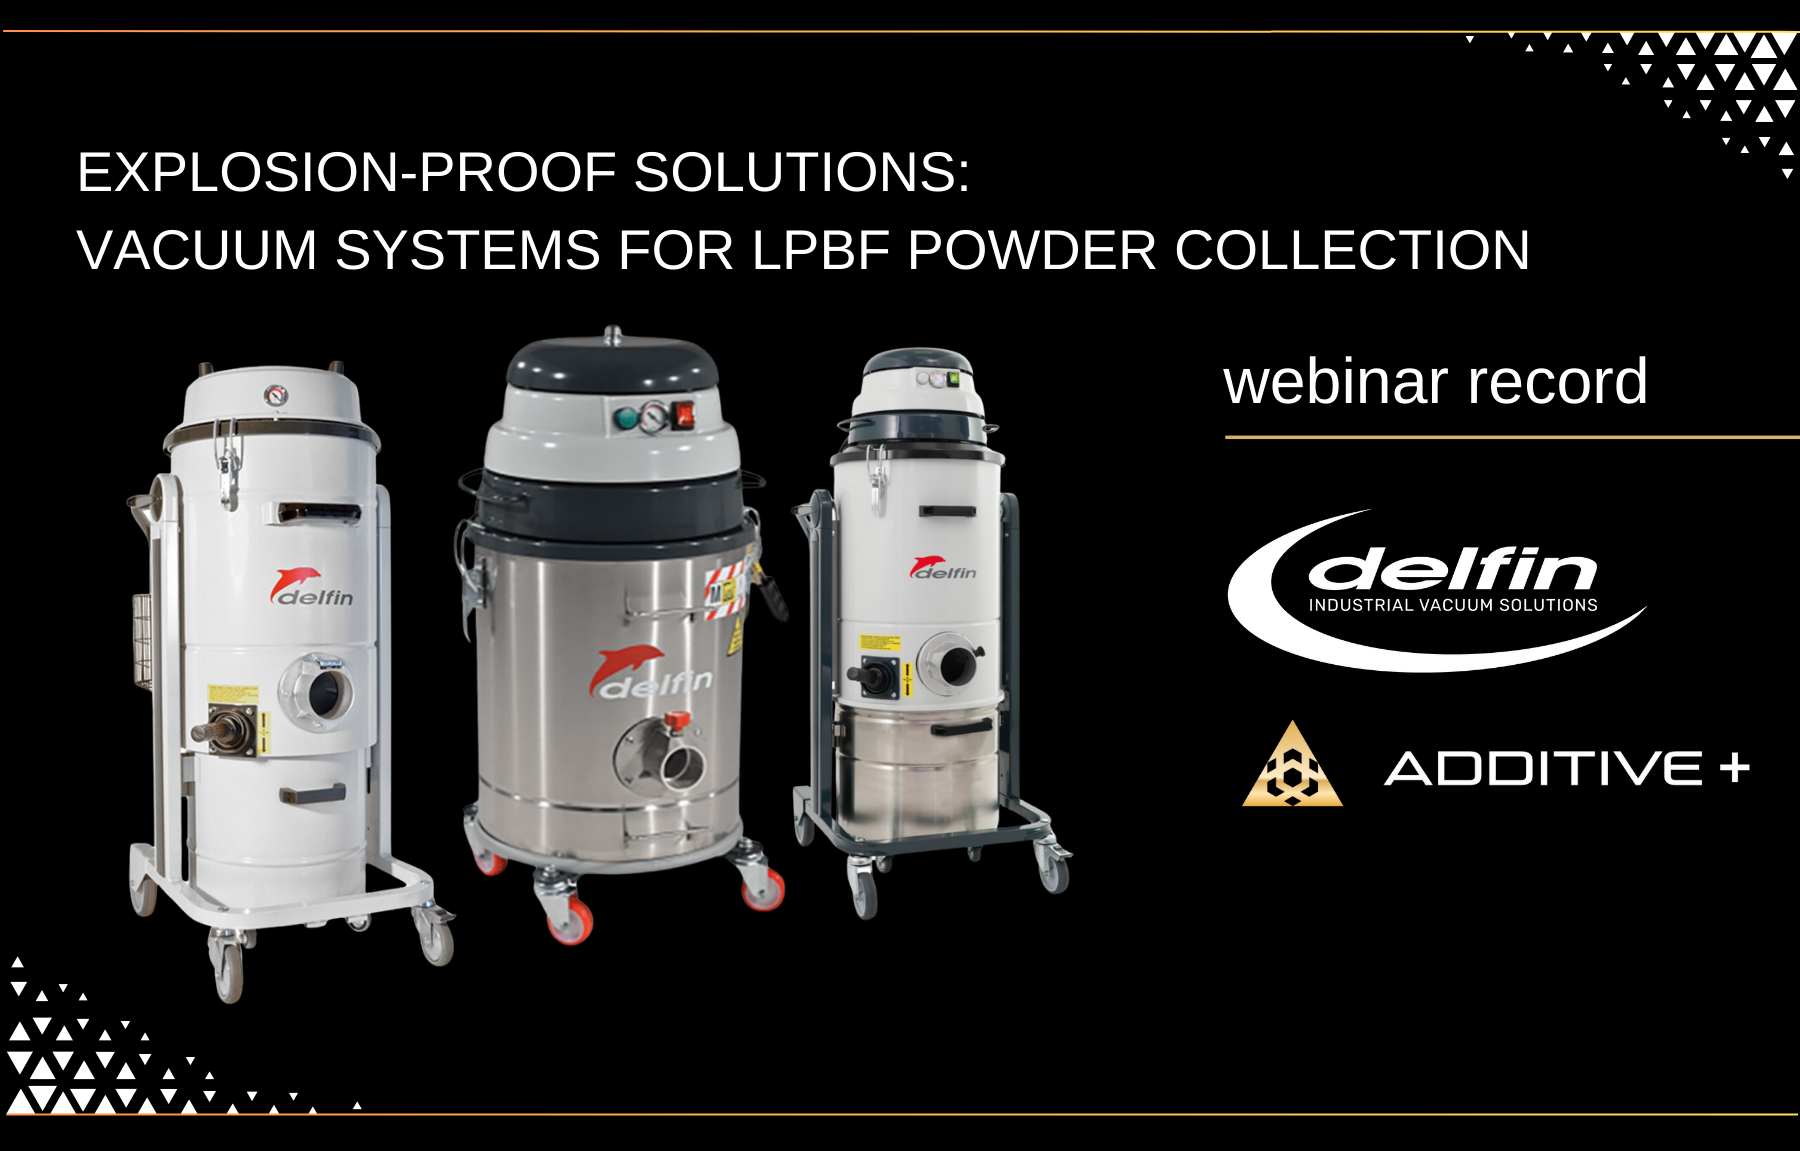 Explosion-Proof Solutions: Vacuum Systems for LPBF Powder Collection. Webinar record.